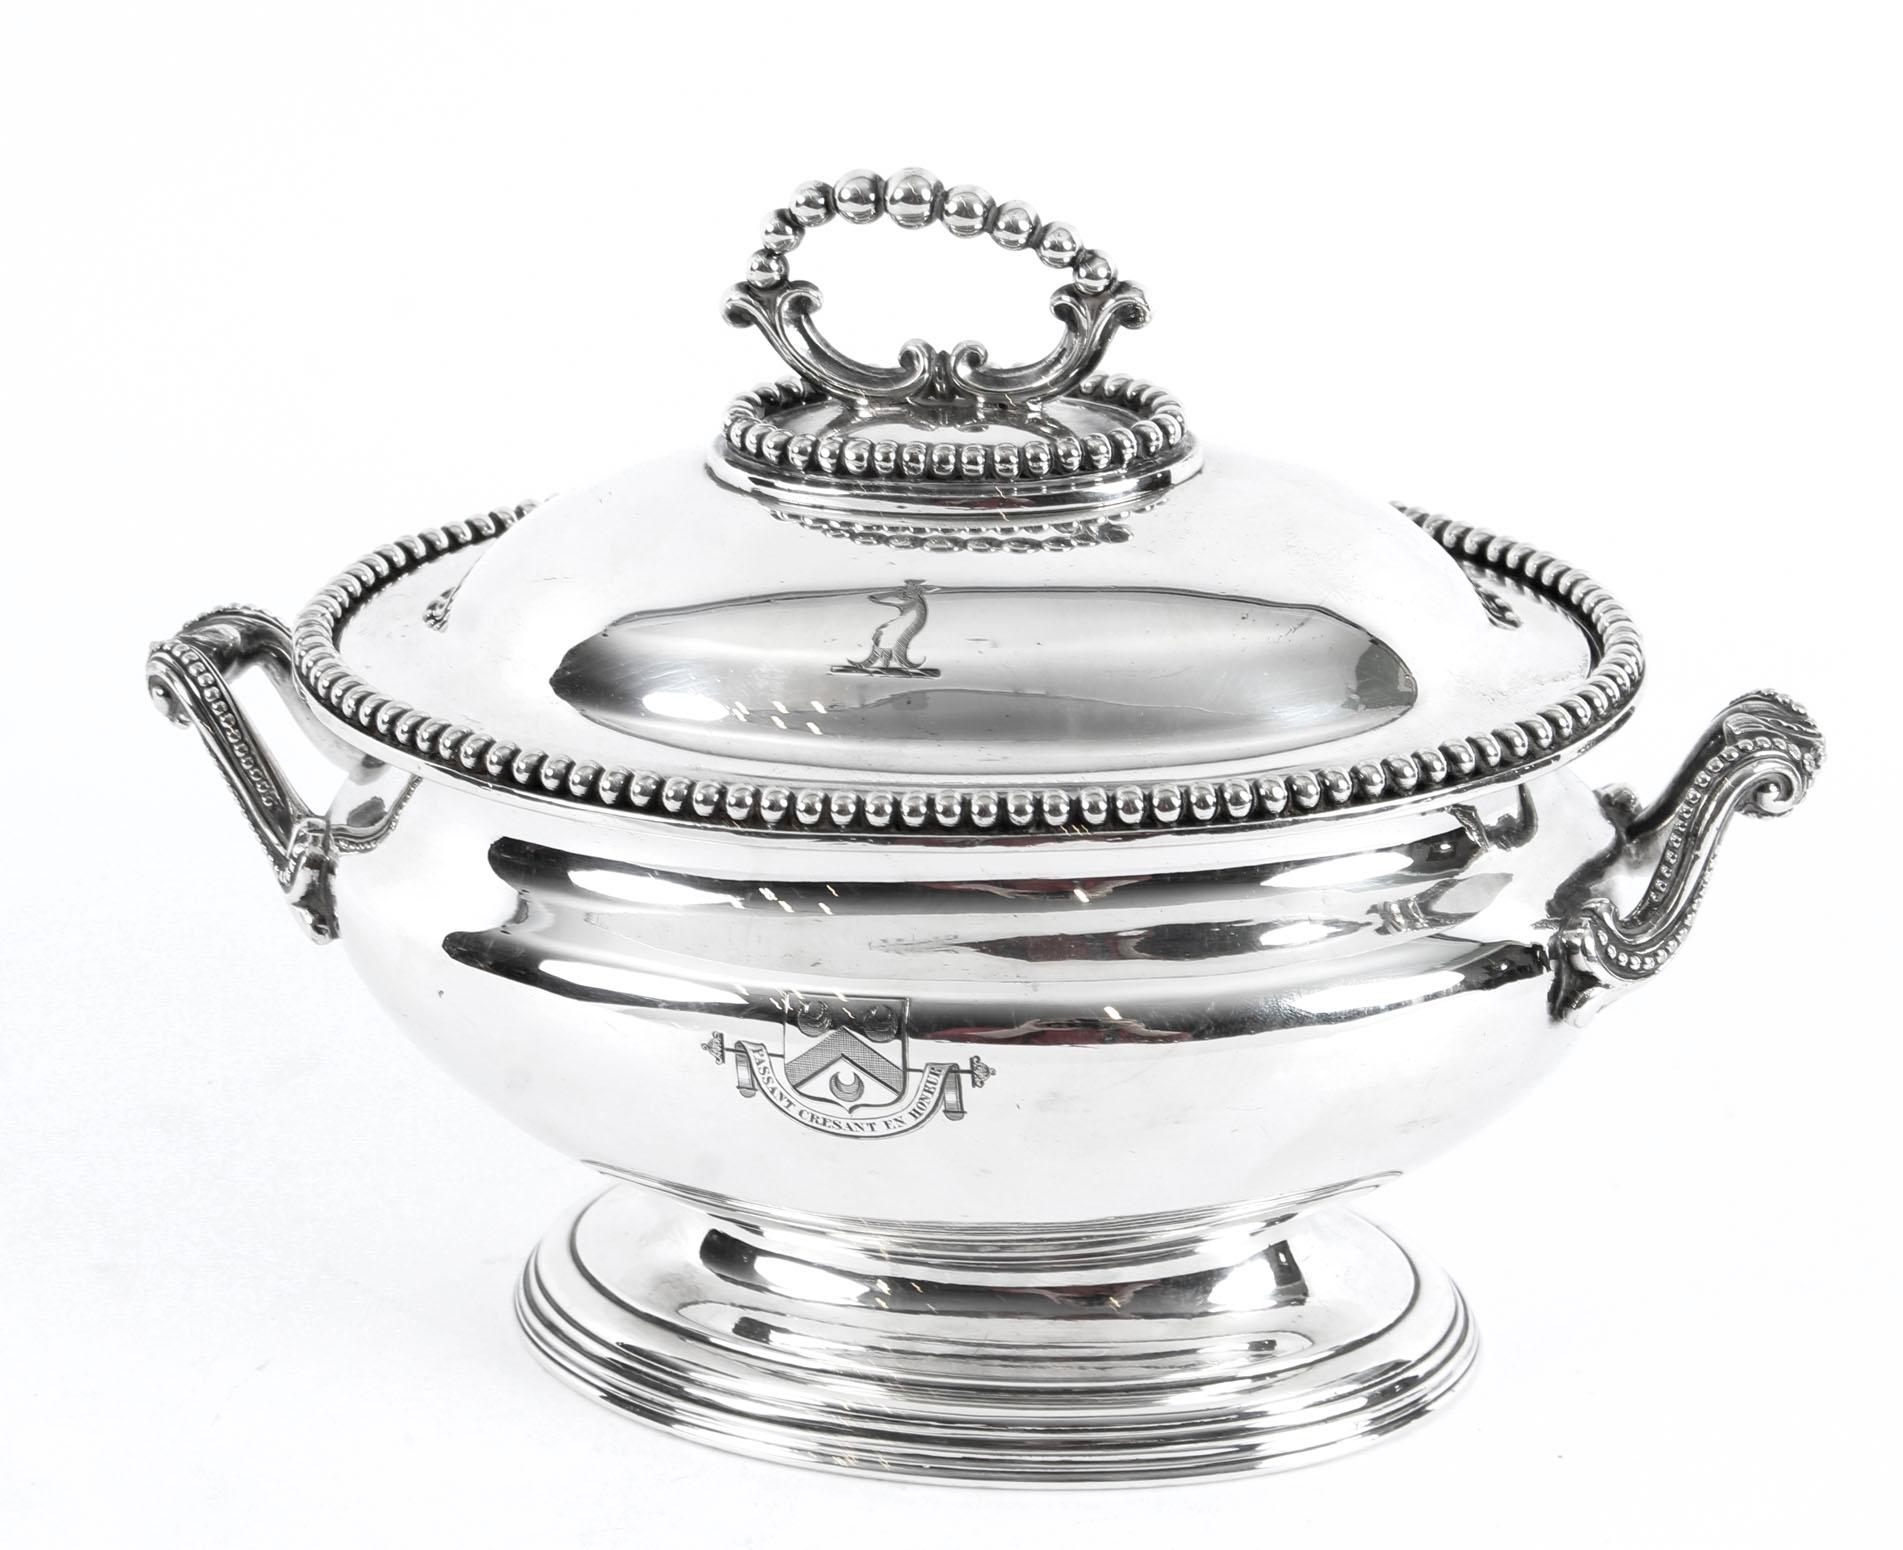 This is an exquisite and rare antique pair of English silver plated sauce tureens, circa 1860 in date.
 
These lovely sauce tureens are of the highest quality and bear the makers' mark of the renowned silversmith Elkington and Co., and the